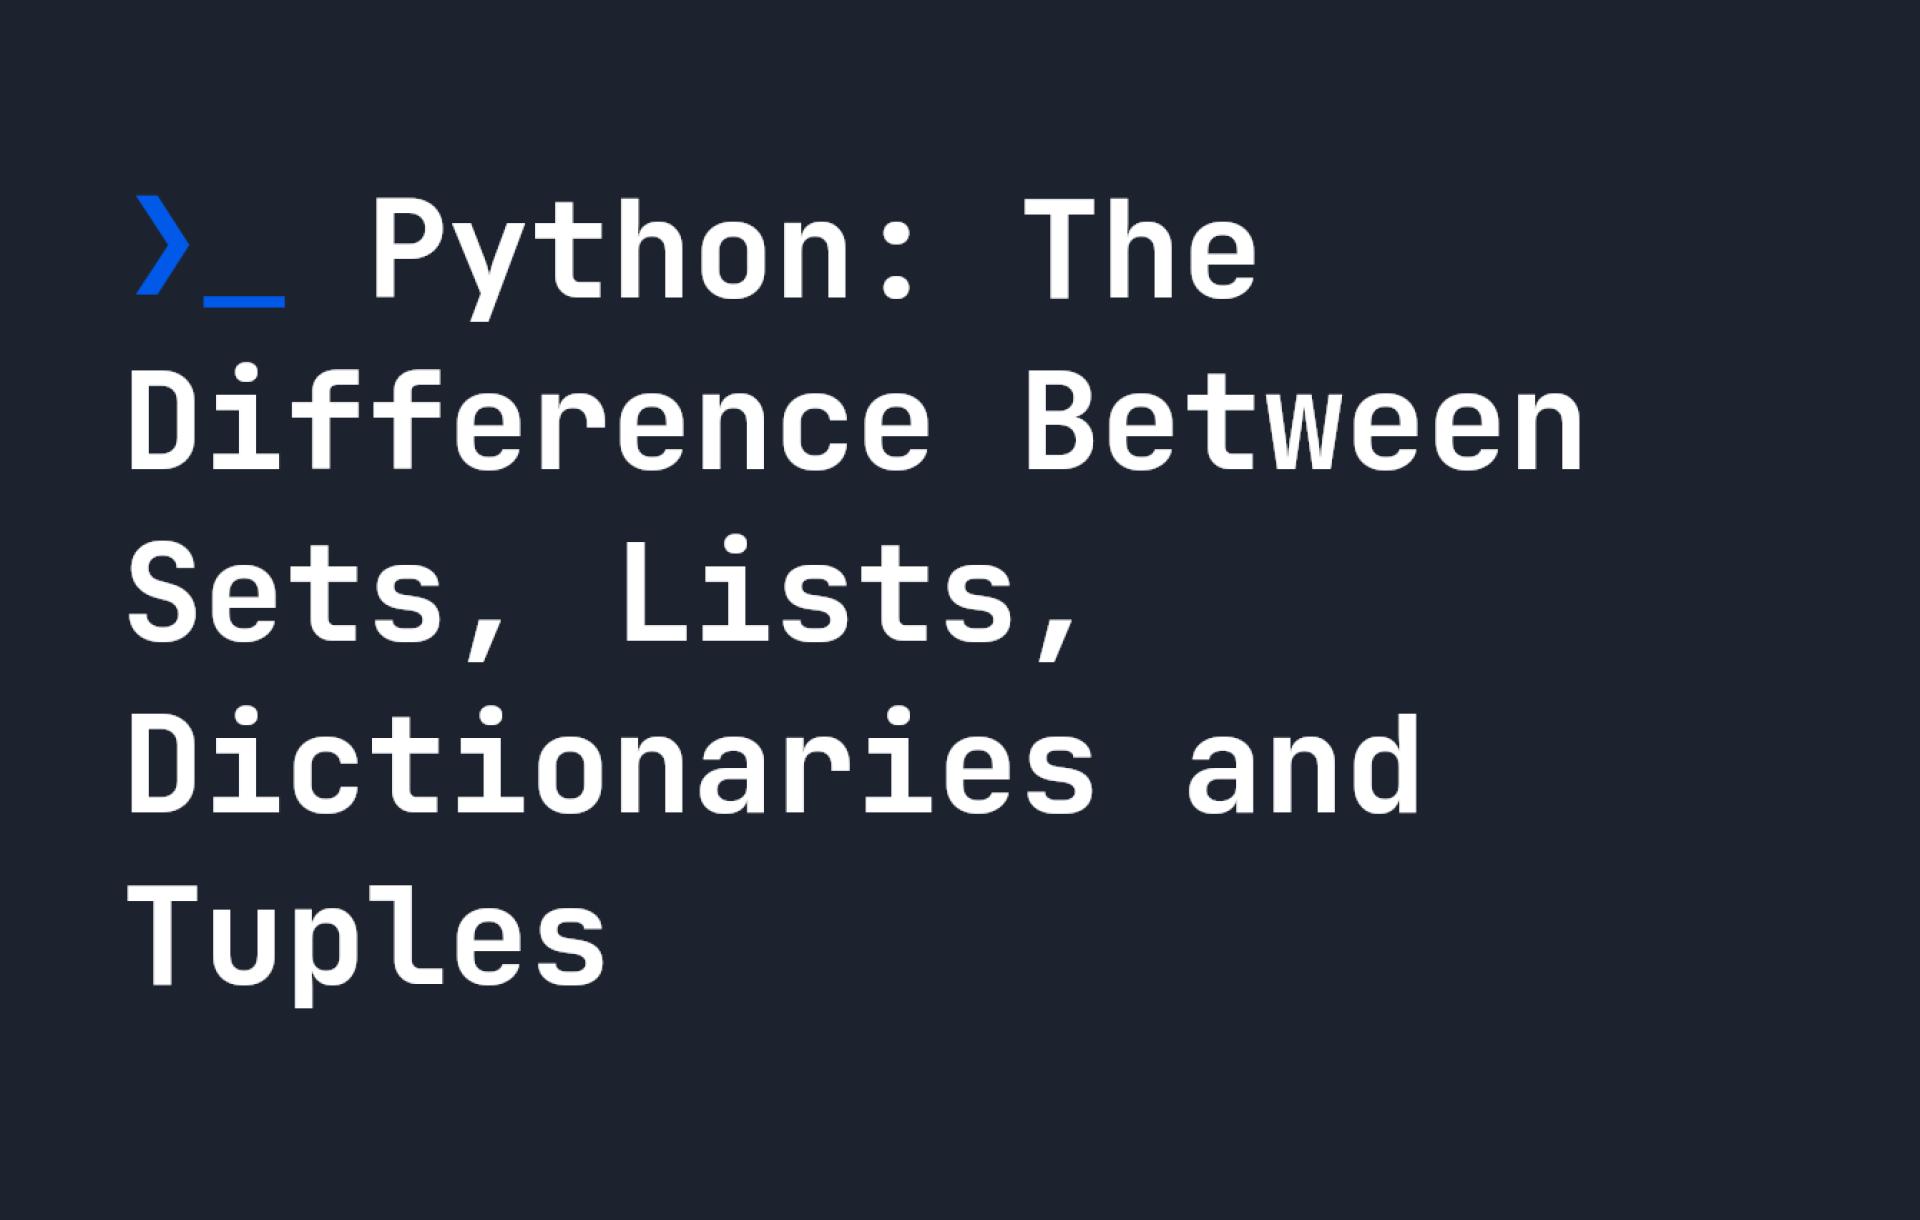 Python: The Difference Between Sets, Lists, Dictionaries and Tuples